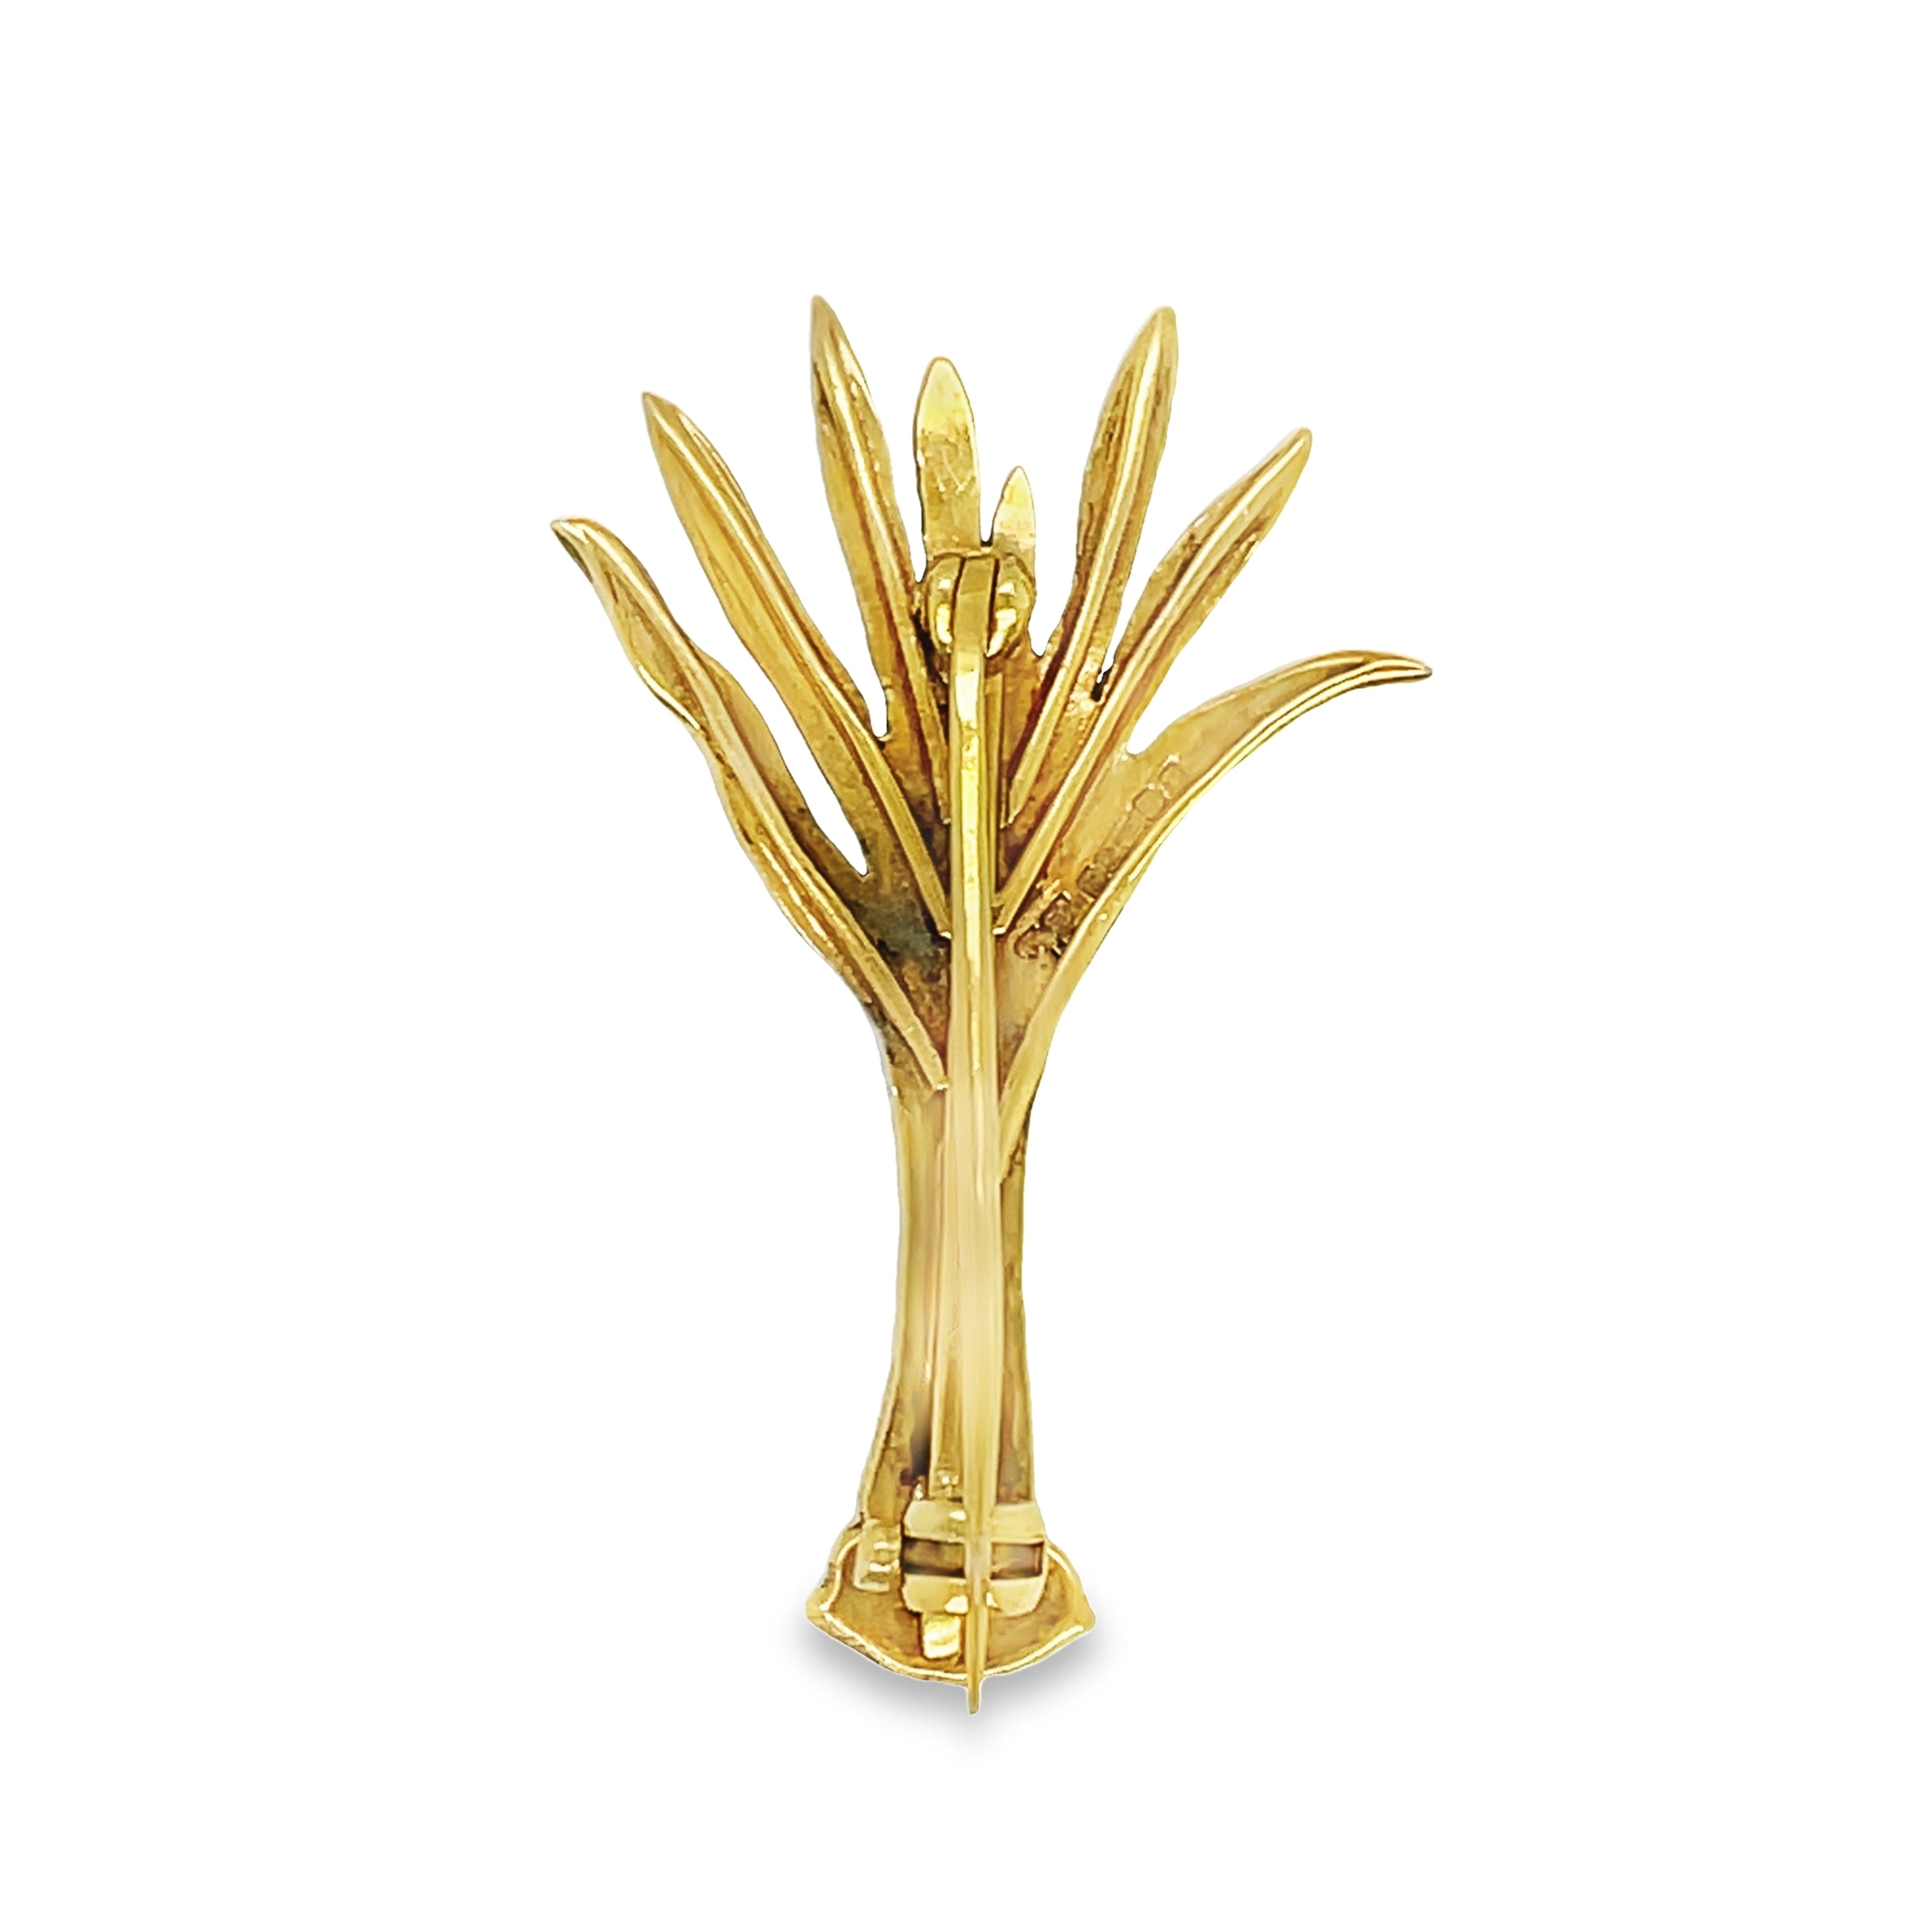 This Enamel Yellow Gold Pin boasts a sleek and chic design, with a stunning enamel finish and made of 18k yellow gold. Measuring at 1.5", it adds a touch of elegance to any outfit. Elevate your style with this luxurious pin.